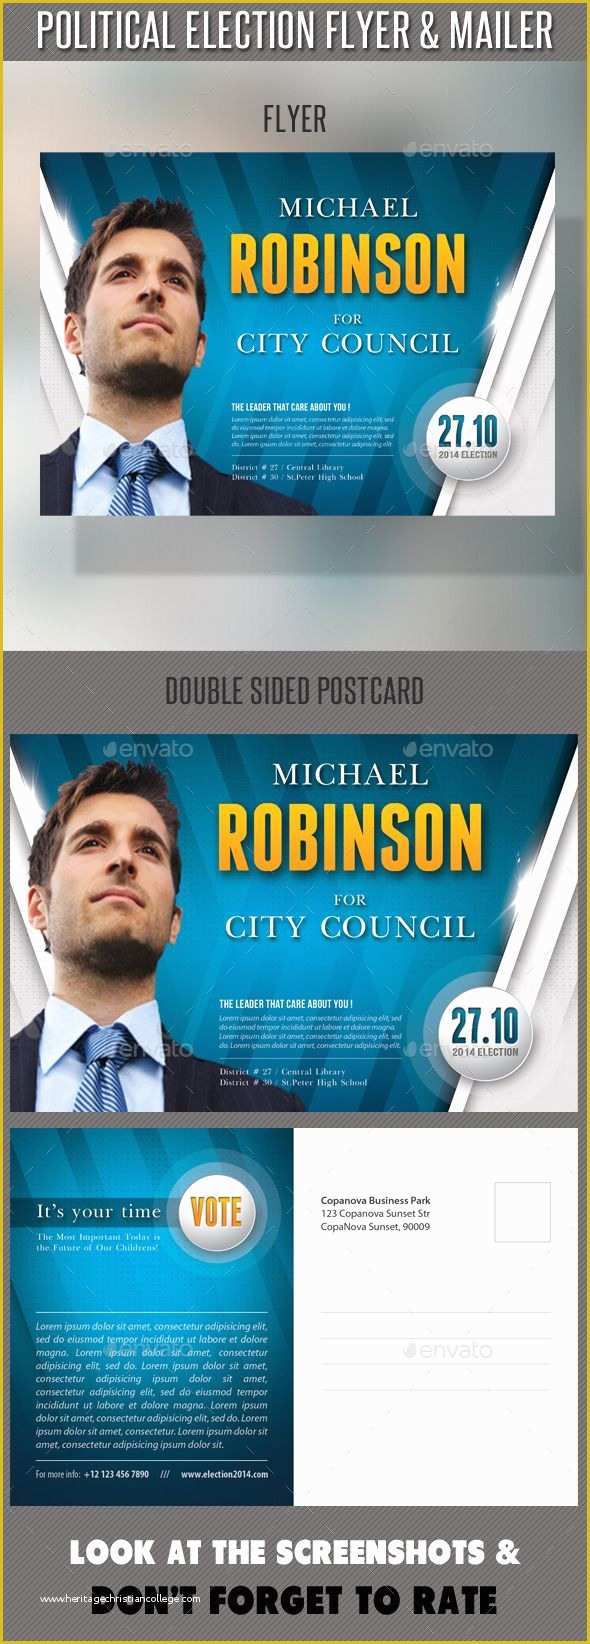 Election Website Templates Free Download Of 13 Best Free Political Campaign Flyer Templates Images On